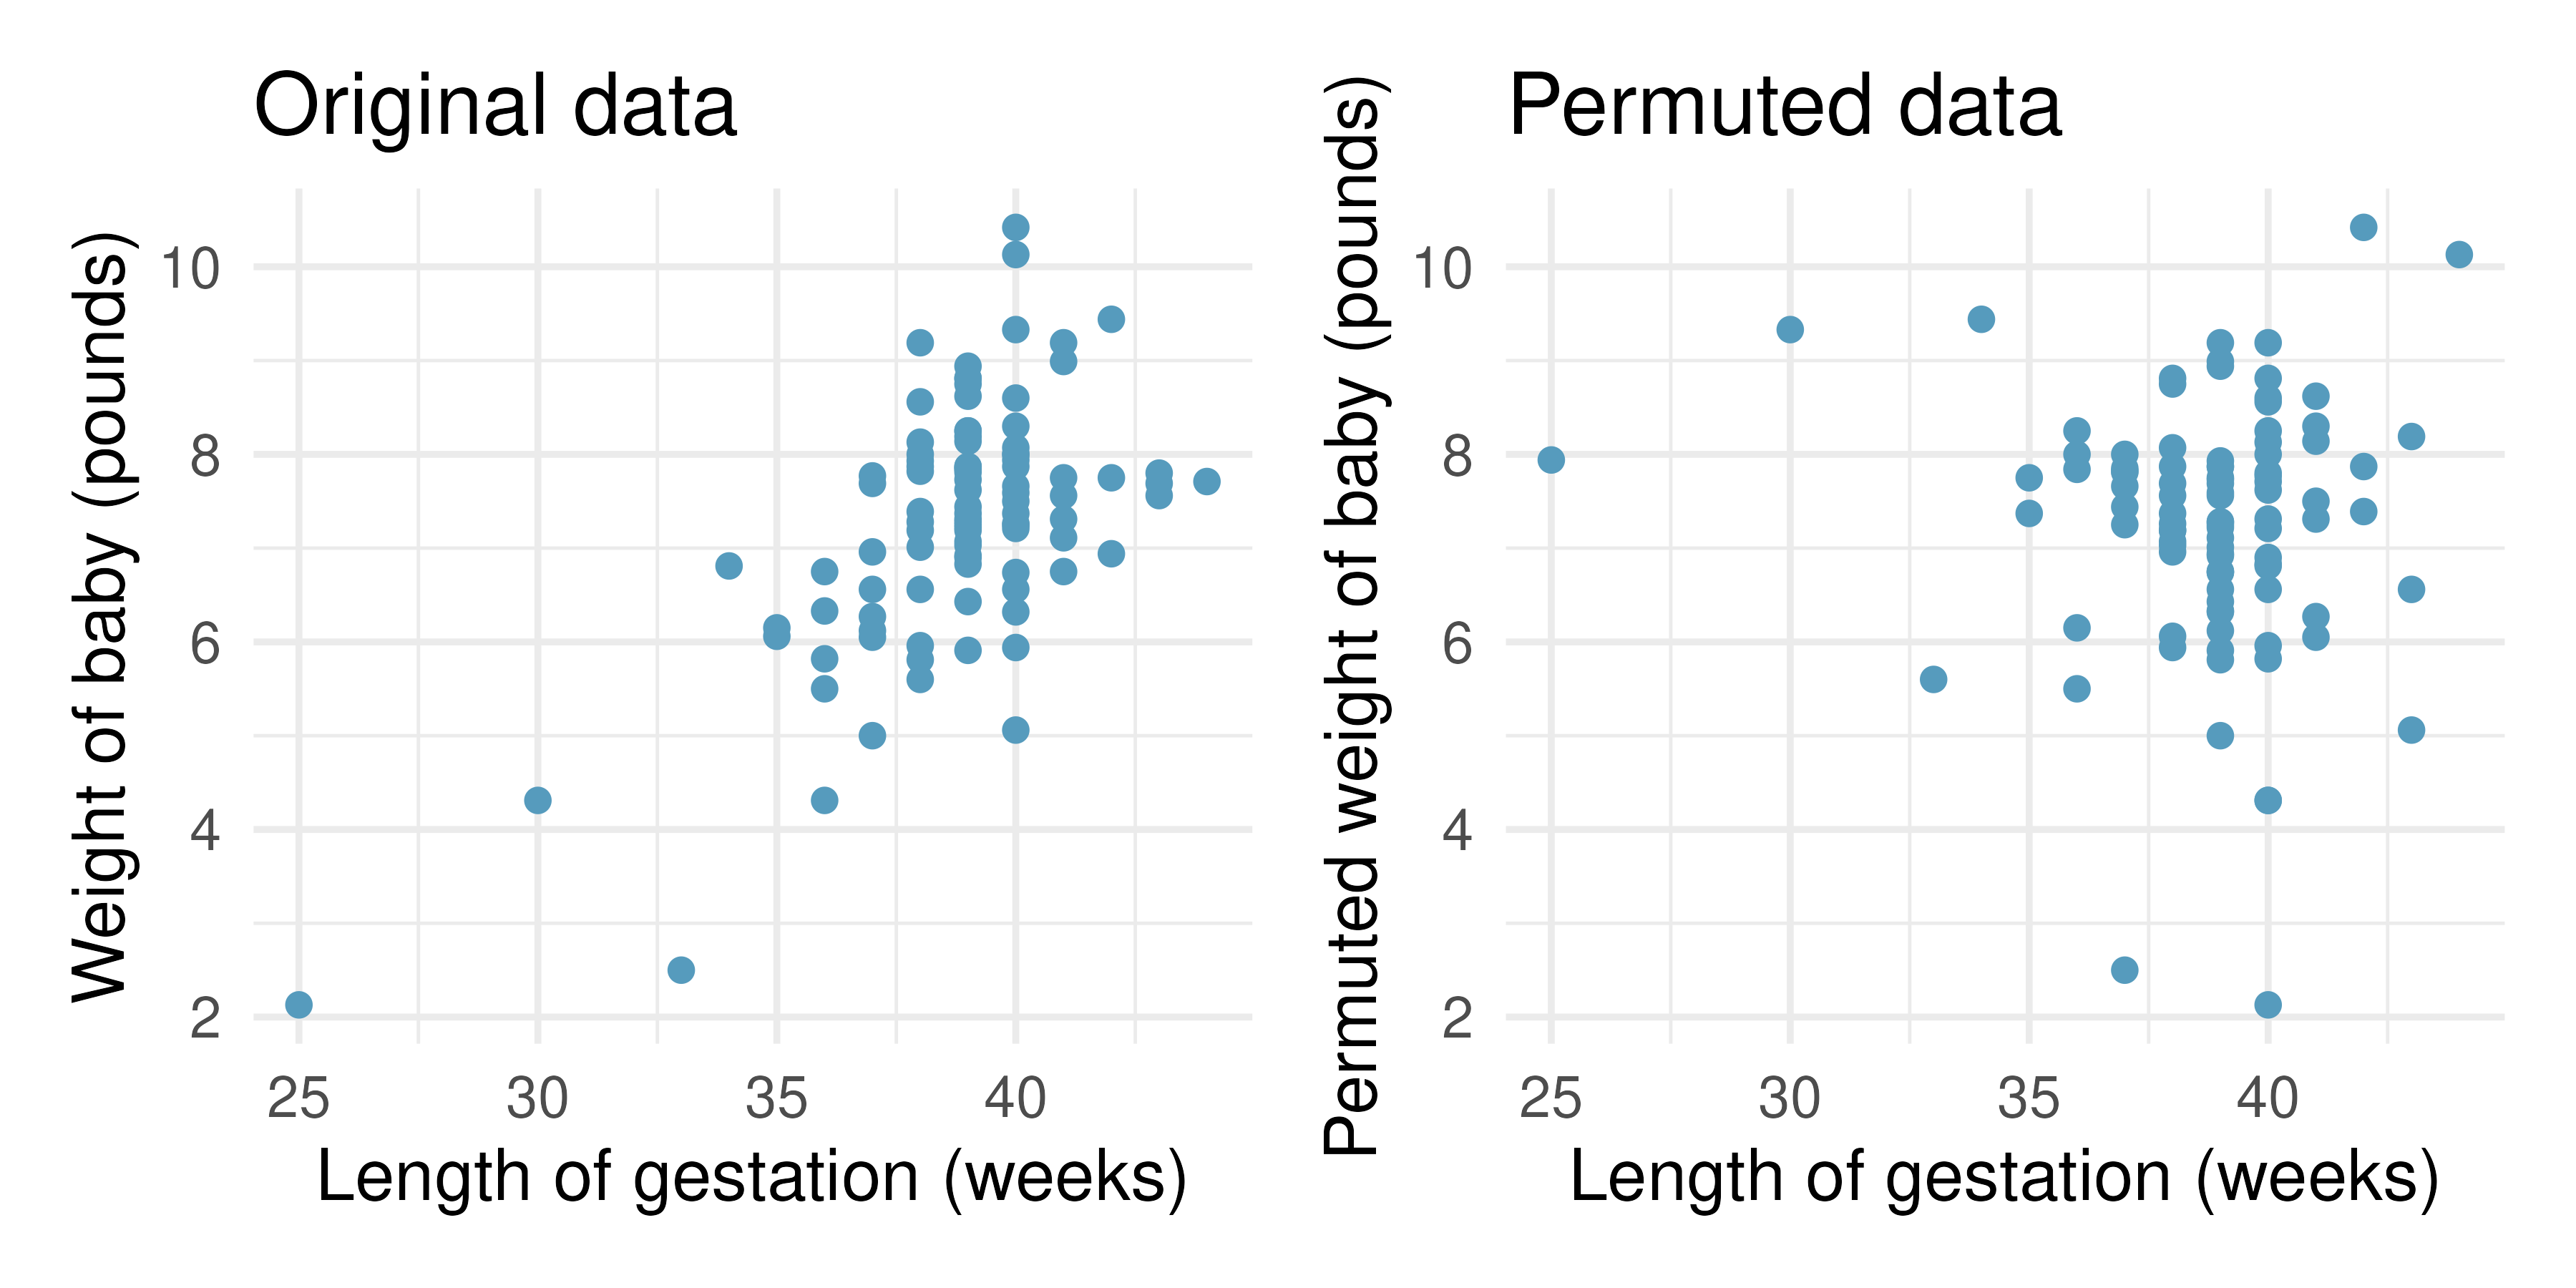 Original (left) and permuted (right) data. The permutation removes the linear relationship between weight and weeks. Repeated permutations allow for quantifying the variability in the slope under the condition that there is no linear relationship (i.e., that the null hypothesis is true).